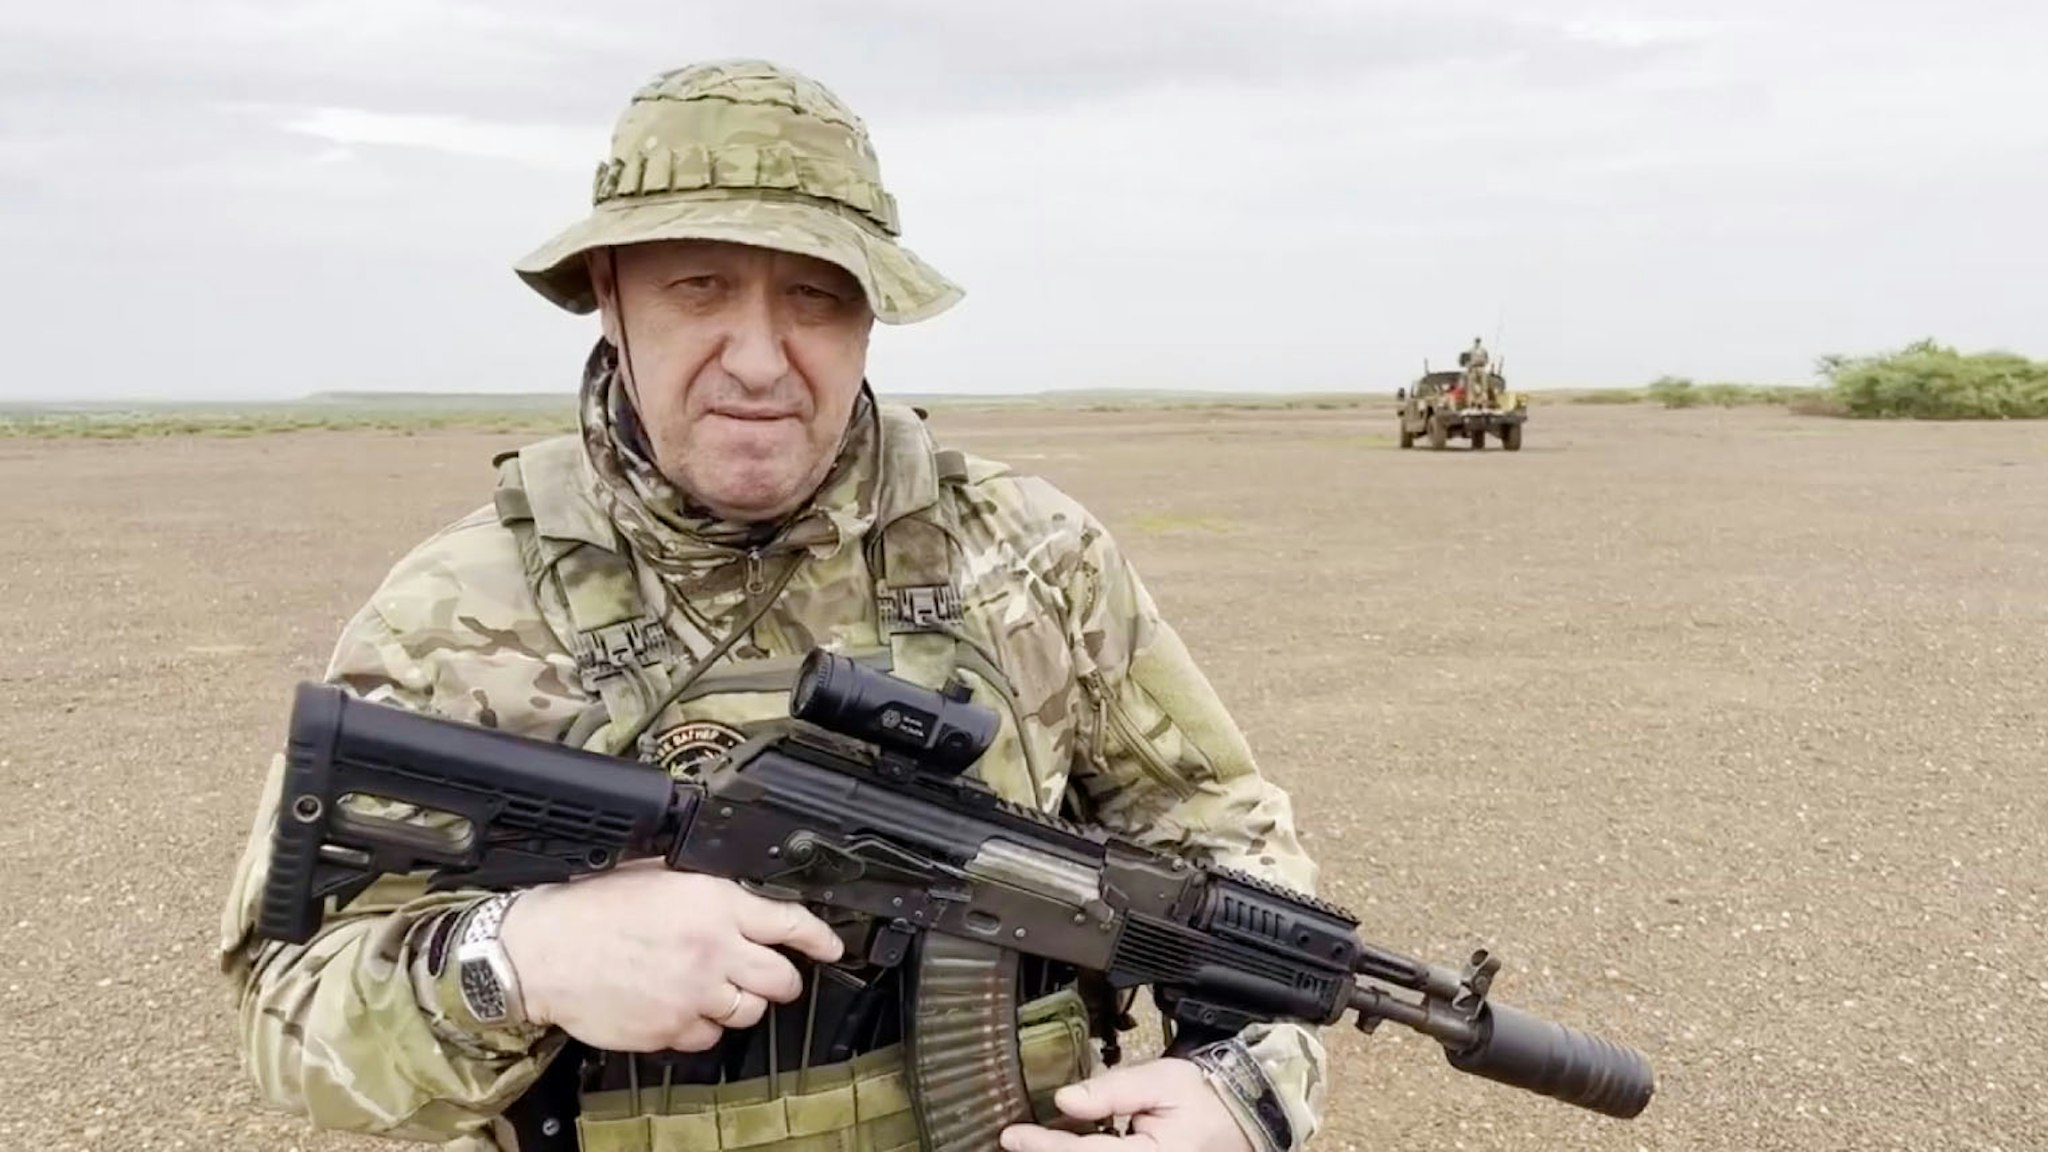 UNSPECIFIED LOCATION IN AFRICA - AUGUST 21: (----EDITORIAL USE ONLY - MANDATORY CREDIT - 'WAGNER TELEGRAM ACCOUNT / HANDOUT' - NO MARKETING NO ADVERTISING CAMPAIGNS - DISTRIBUTED AS A SERVICE TO CLIENTS----) A screen grab captured from a video shared online shows Yevgeny Prigozhin, the founder of the Russian private security company Wagner, holding a rifle in a desert area while wearing camouflage in a video for the first time after his rebellion against the Russian administration in an unspecified location in Africa on August 21, 2023. In the footage shared on the Telegram channel 'Wagner's evacuation', Prigozhin stated that they have made Russia 'even greater' on all continents, including Africa.